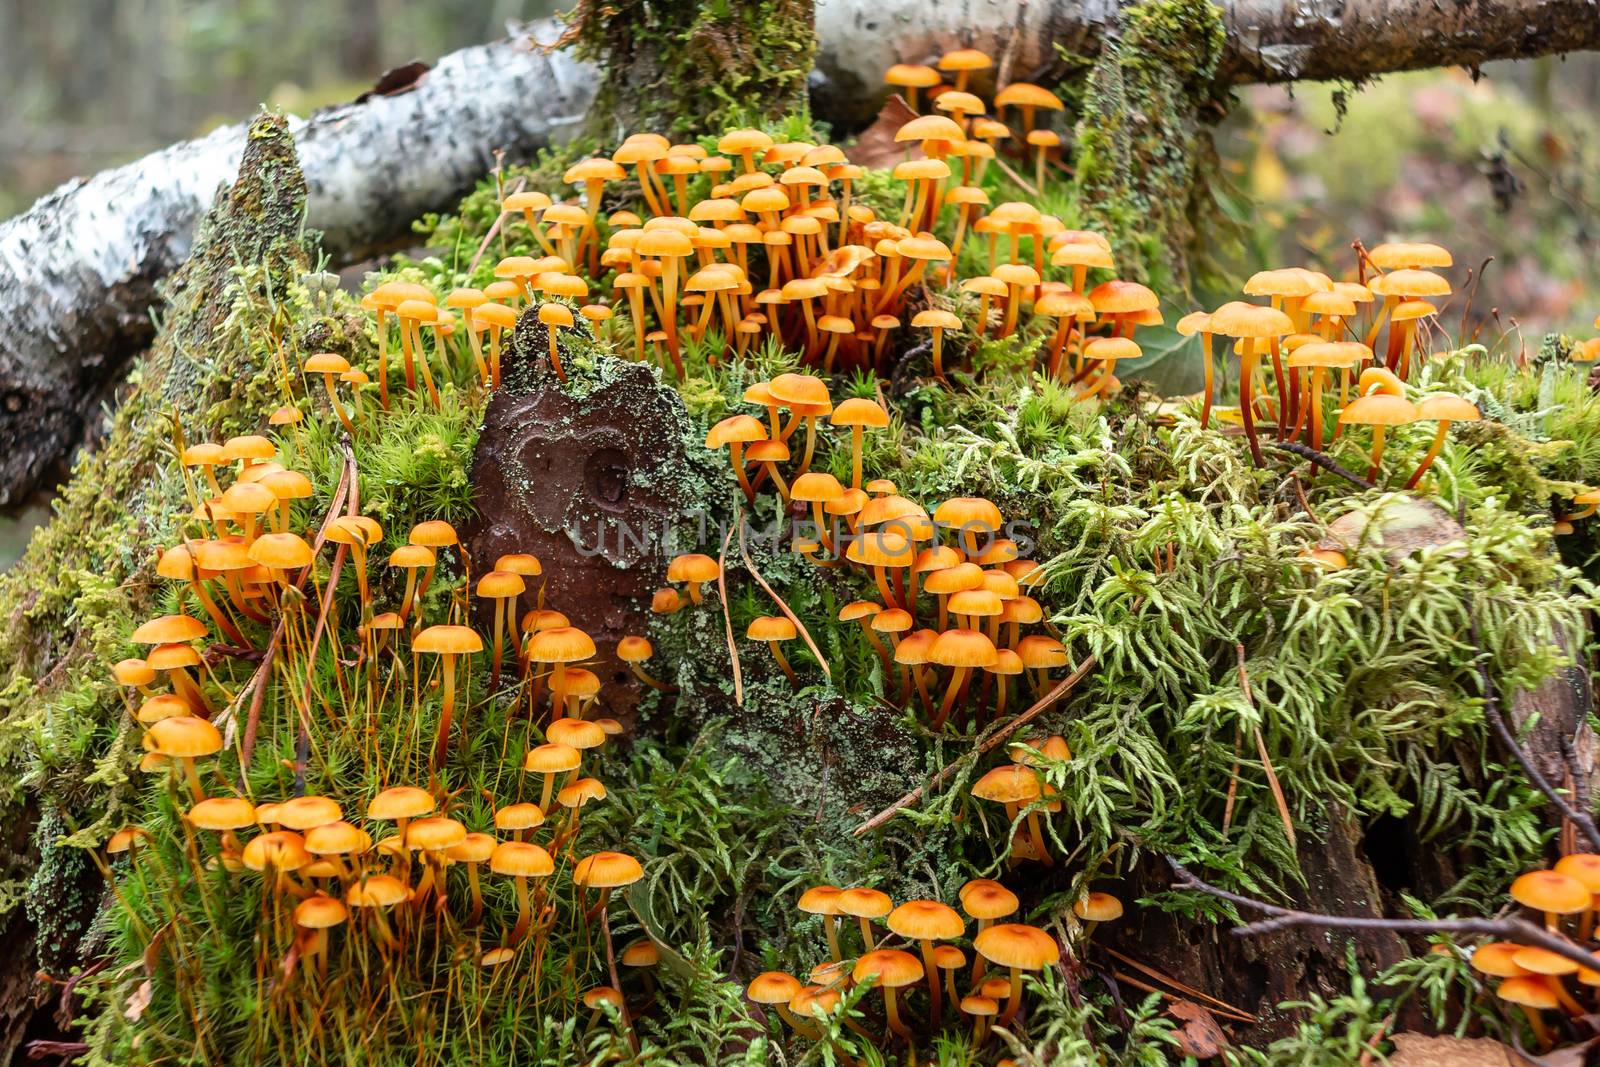 Group of forest mushrooms Xeromphalina campanella called golden trumpet in the forest on an old mossy stump by galsand